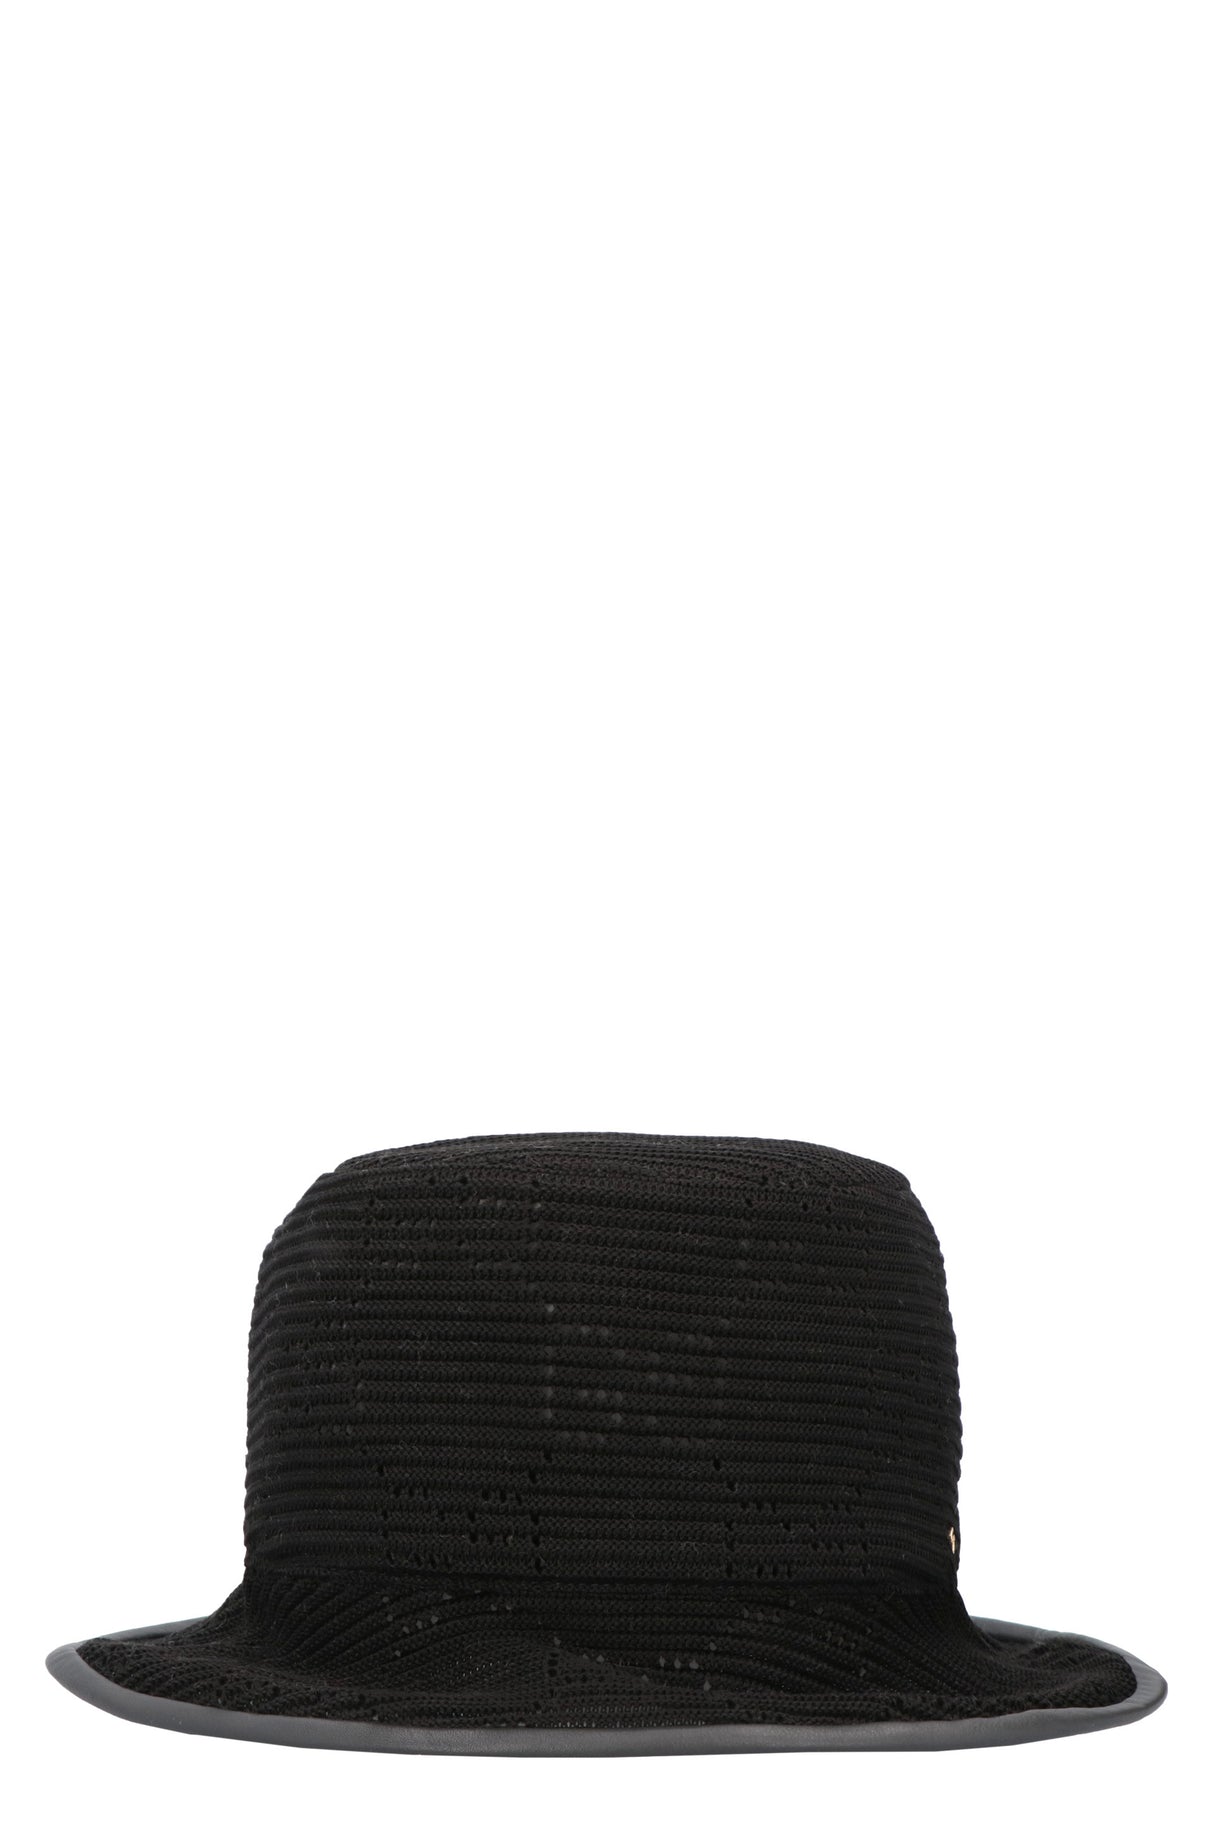 GUCCI Black Knit Beanie with Leather Trimming for Women